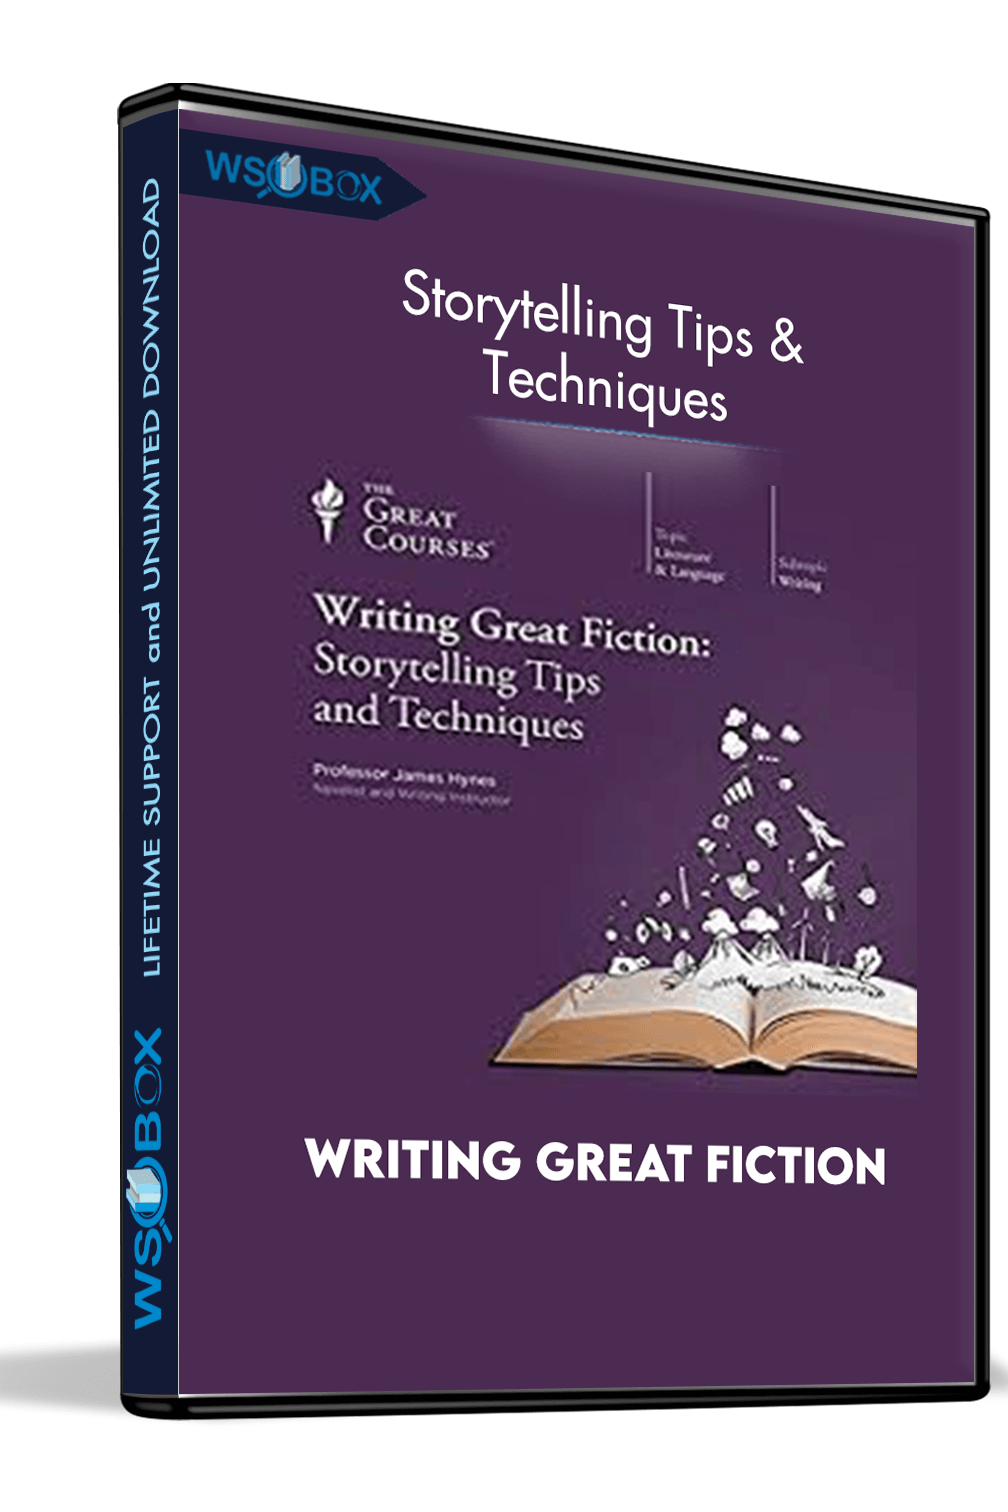 Writing Great Fiction – Storytelling Tips and Techniques